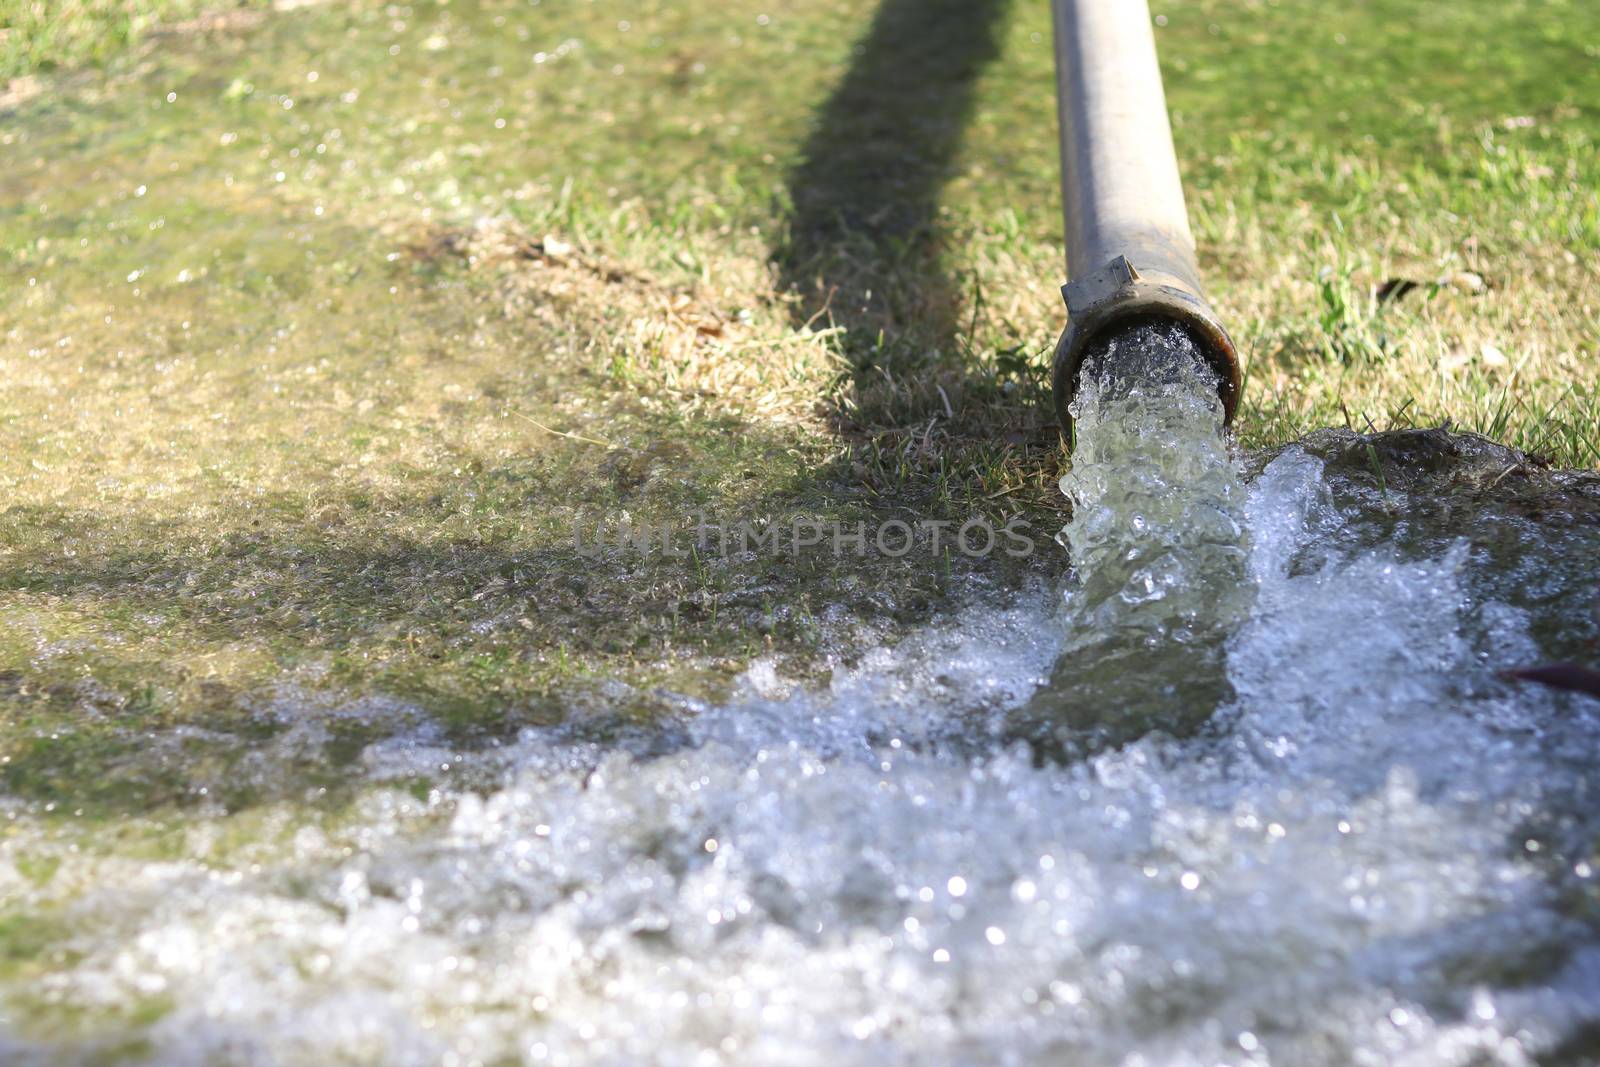 The water was gushing out from a metal pipe on the lawn.